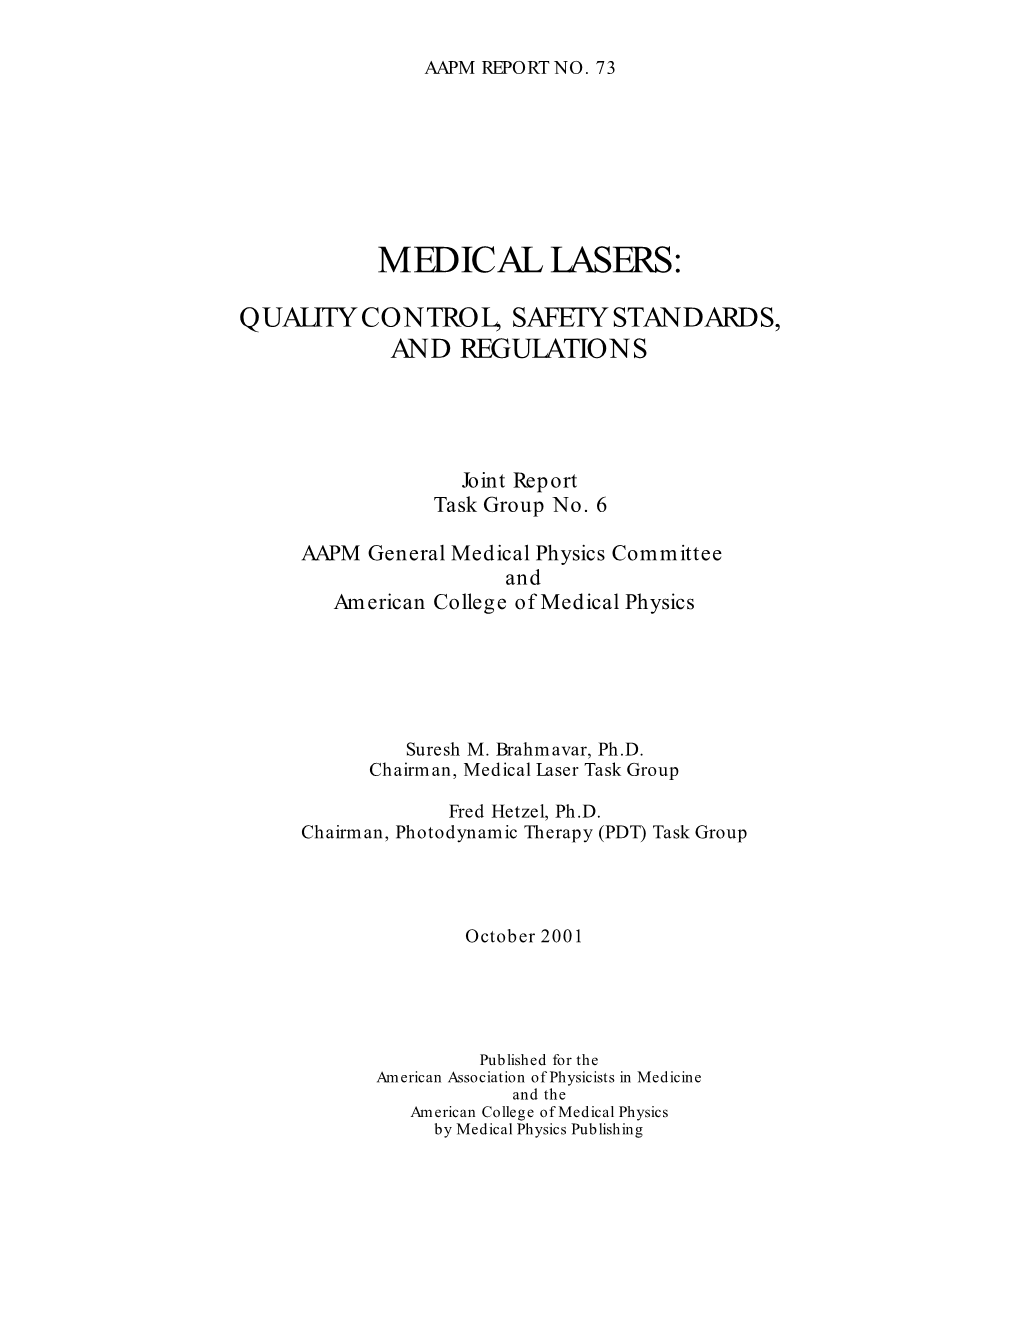 Medical Lasers: Quality Control, Safety Standards, and Regulations